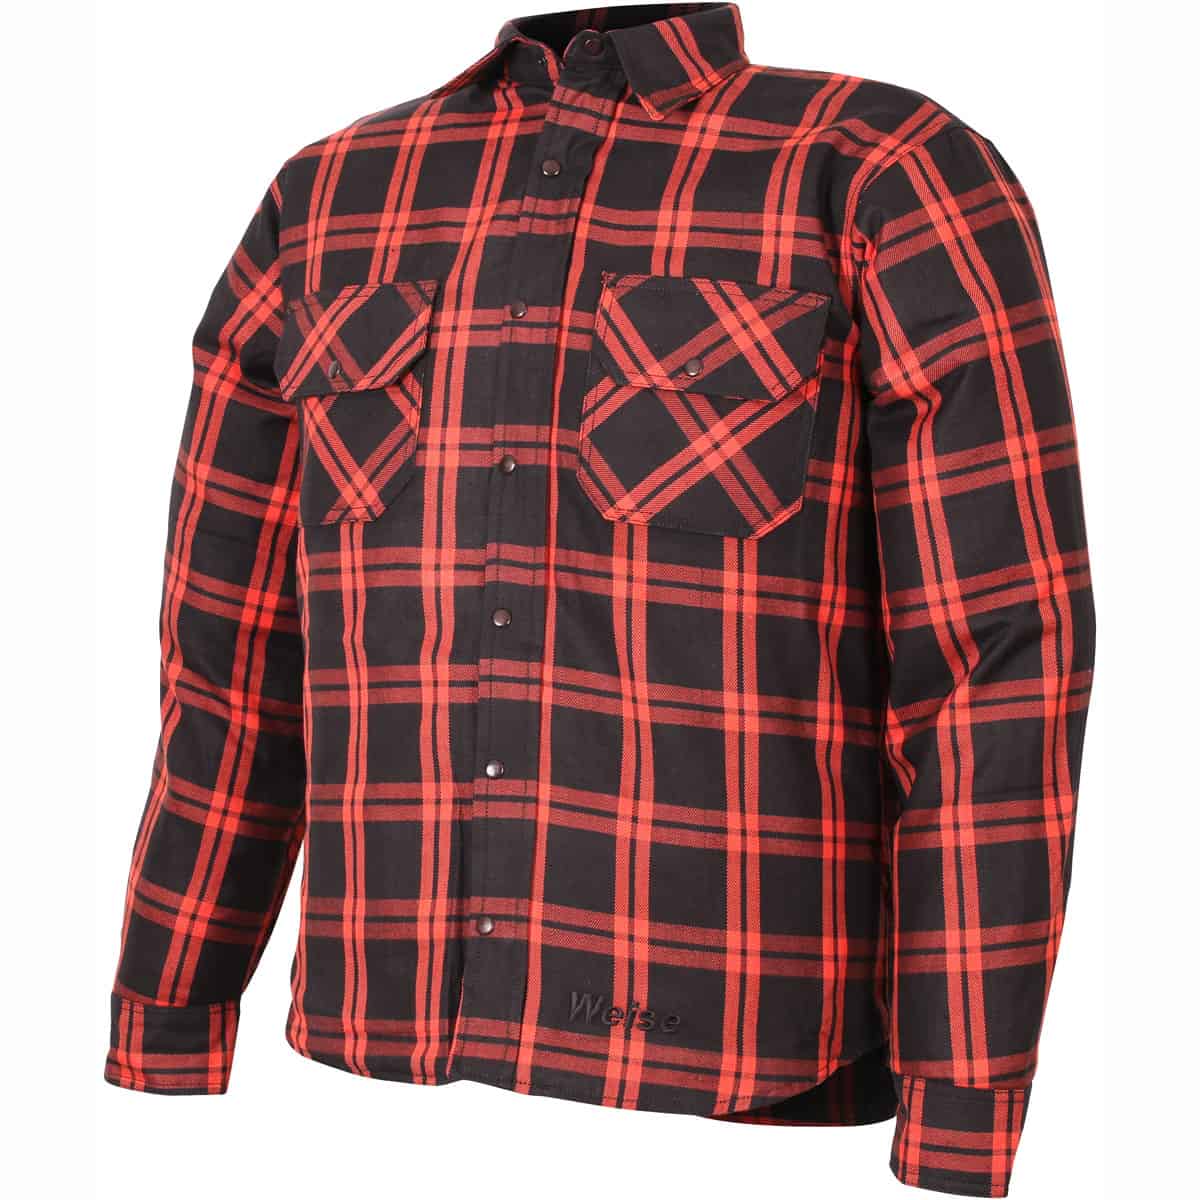 Weise Redwood Protective Shirt - Black Red left side